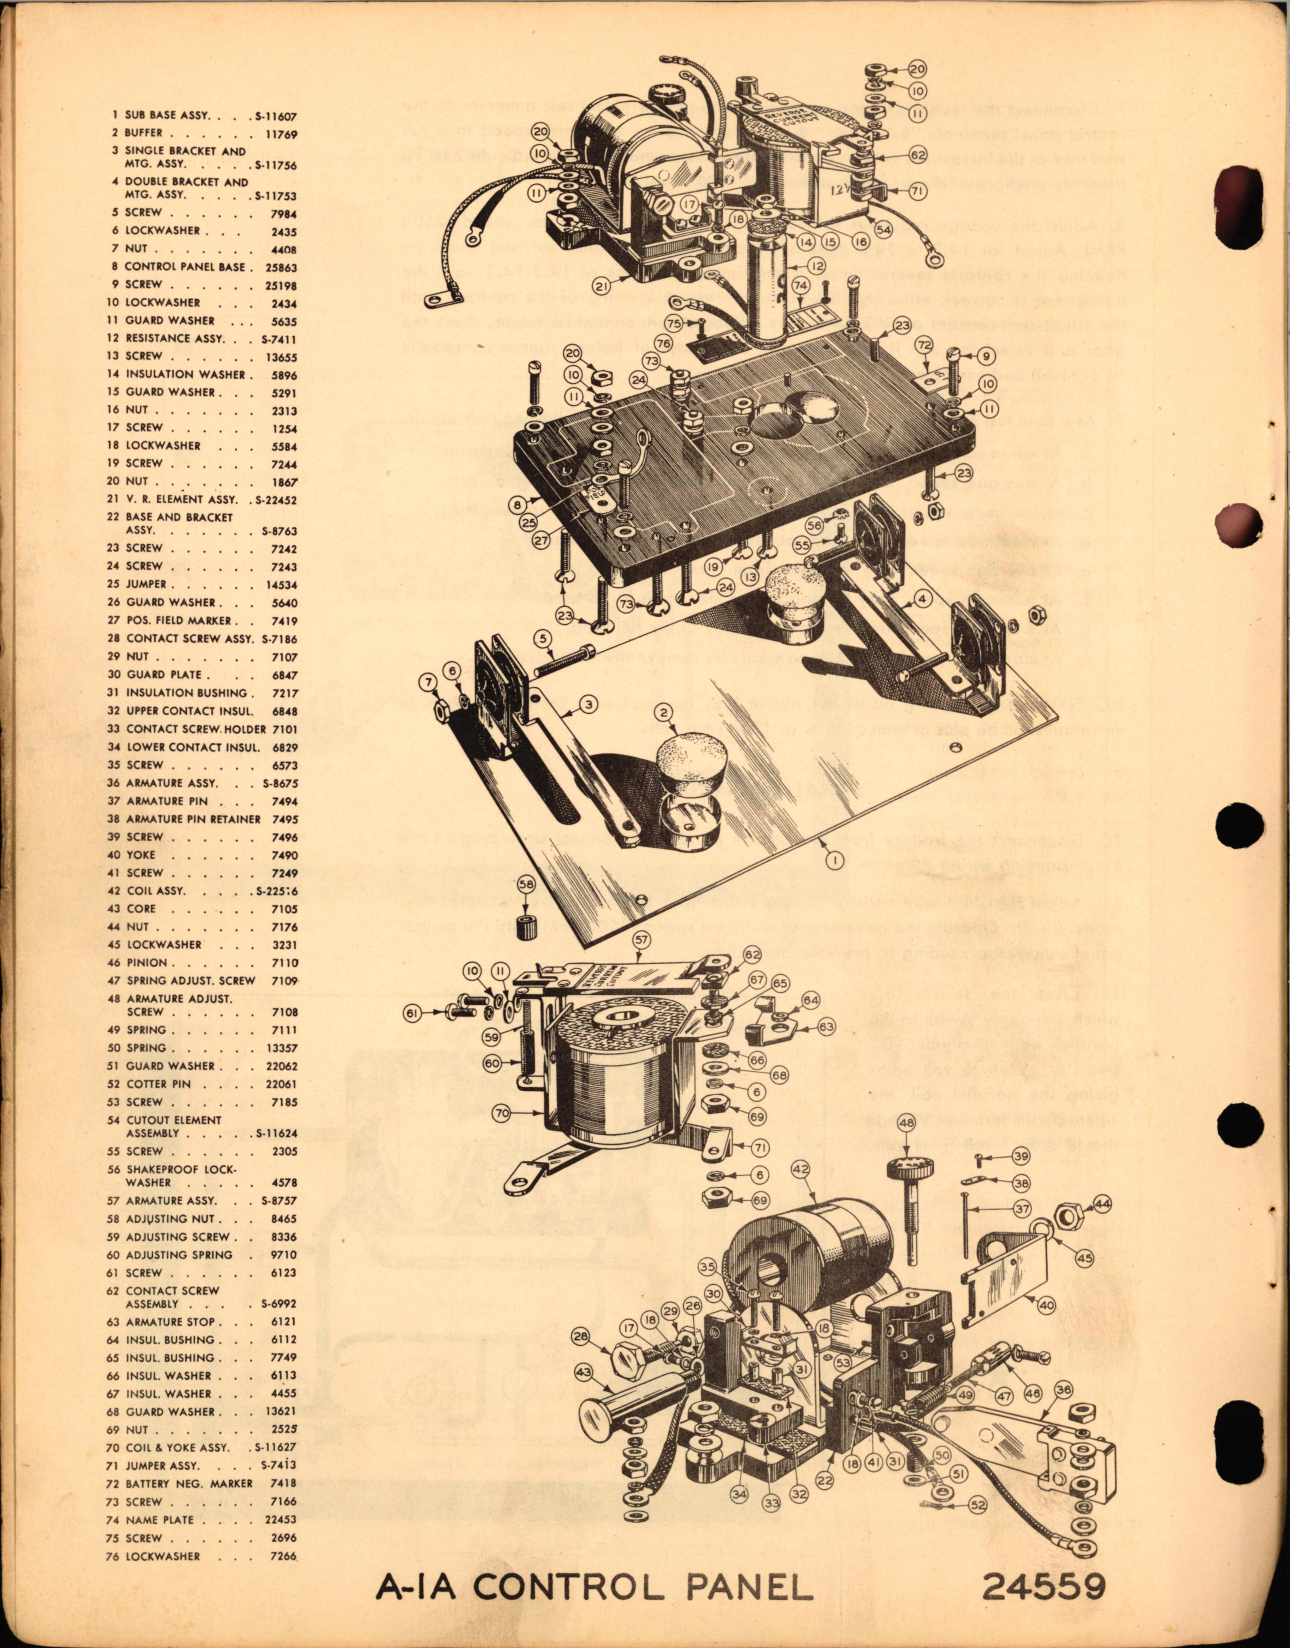 Sample page 7 from AirCorps Library document: Leece-Neville Aircraft Equipment Manual